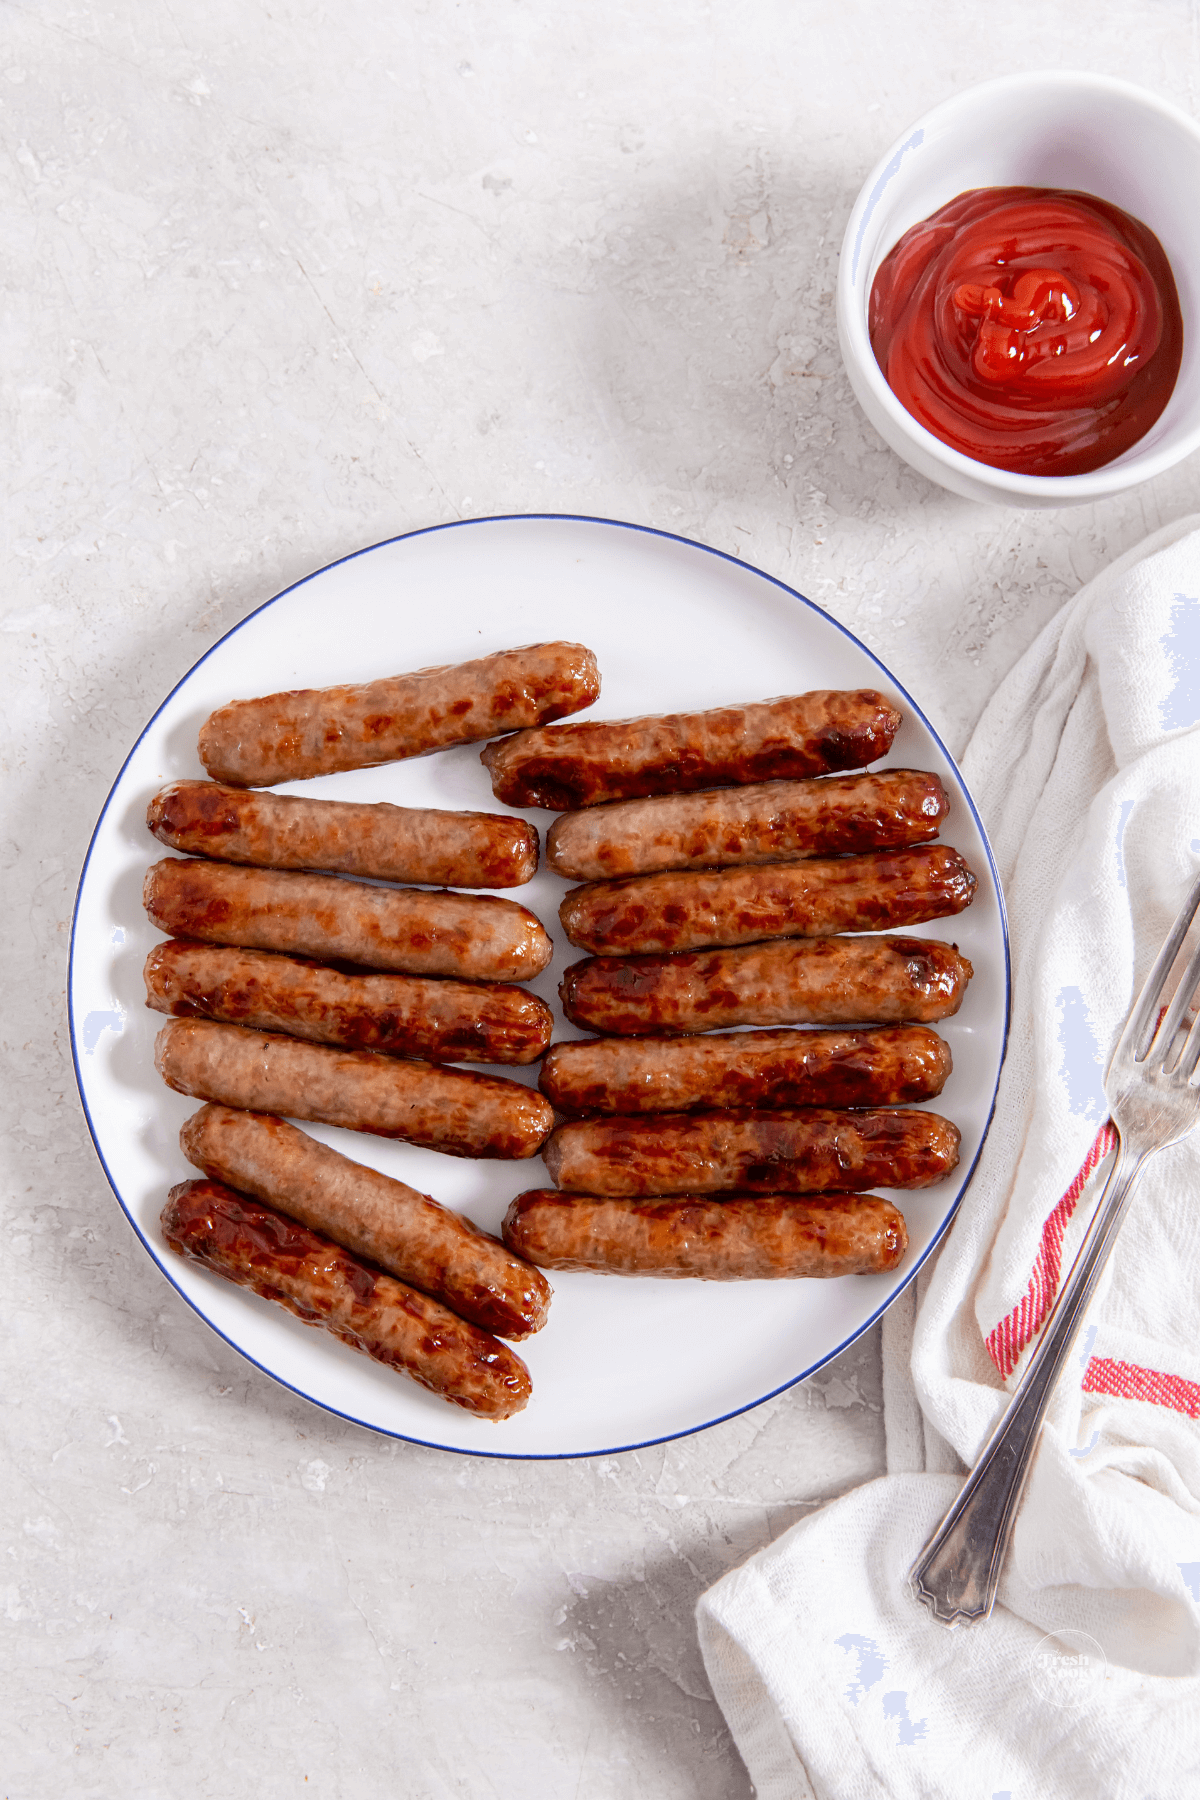 Breakfast sausage links on plate with a side of ketchup.